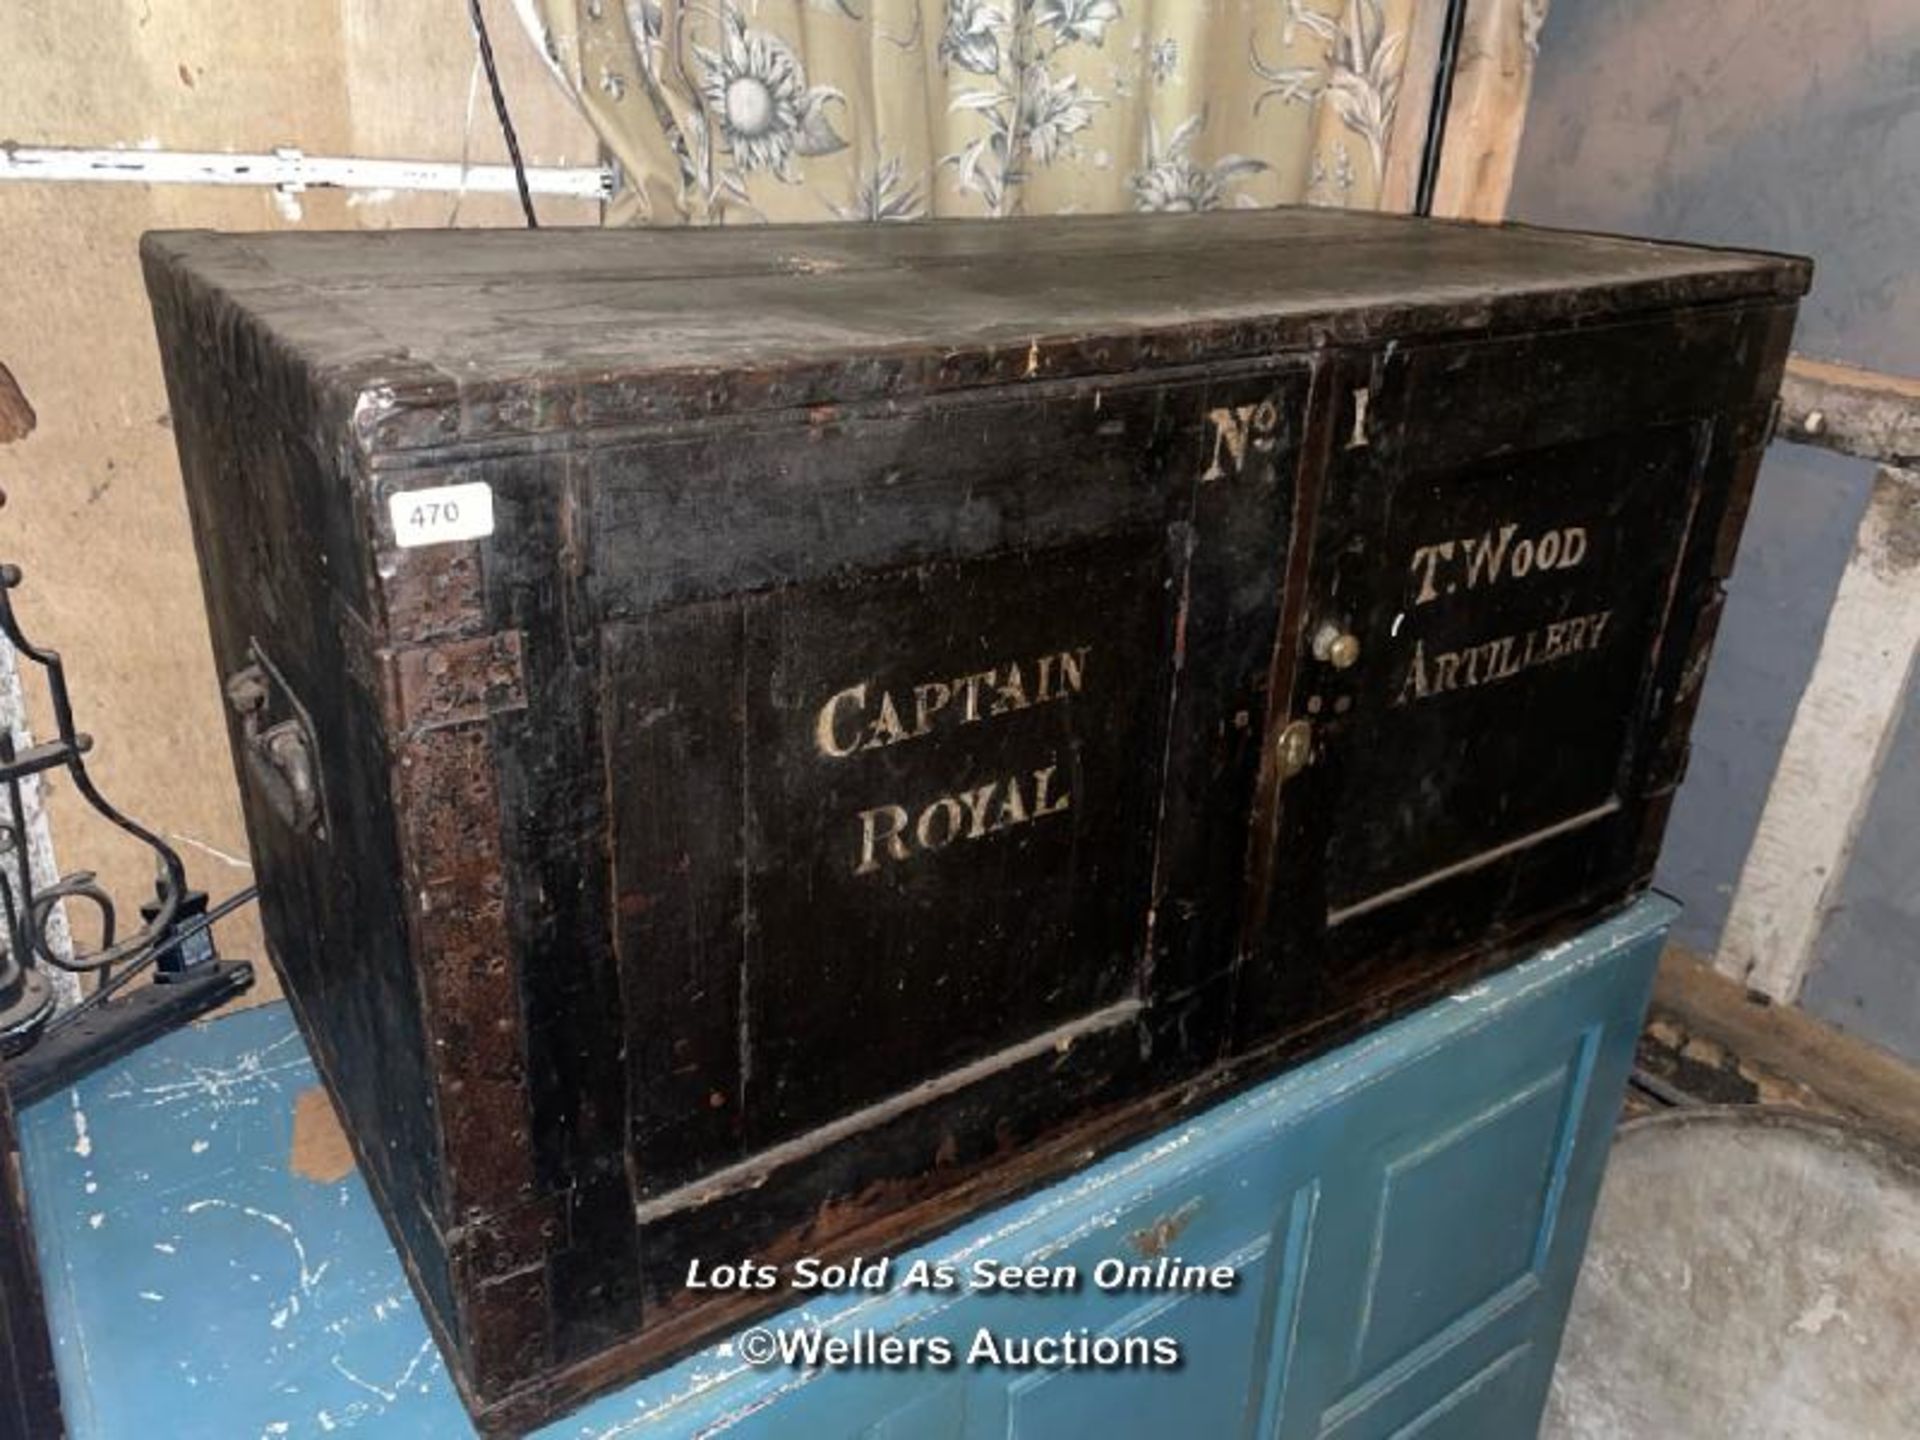 19TH CENTURY CARRYING CASE FOR CAMPAIGN CHESTS, CAPTAIN ROYAL T.WOOD ROYAL ARTILLERY, 105 X 52 X